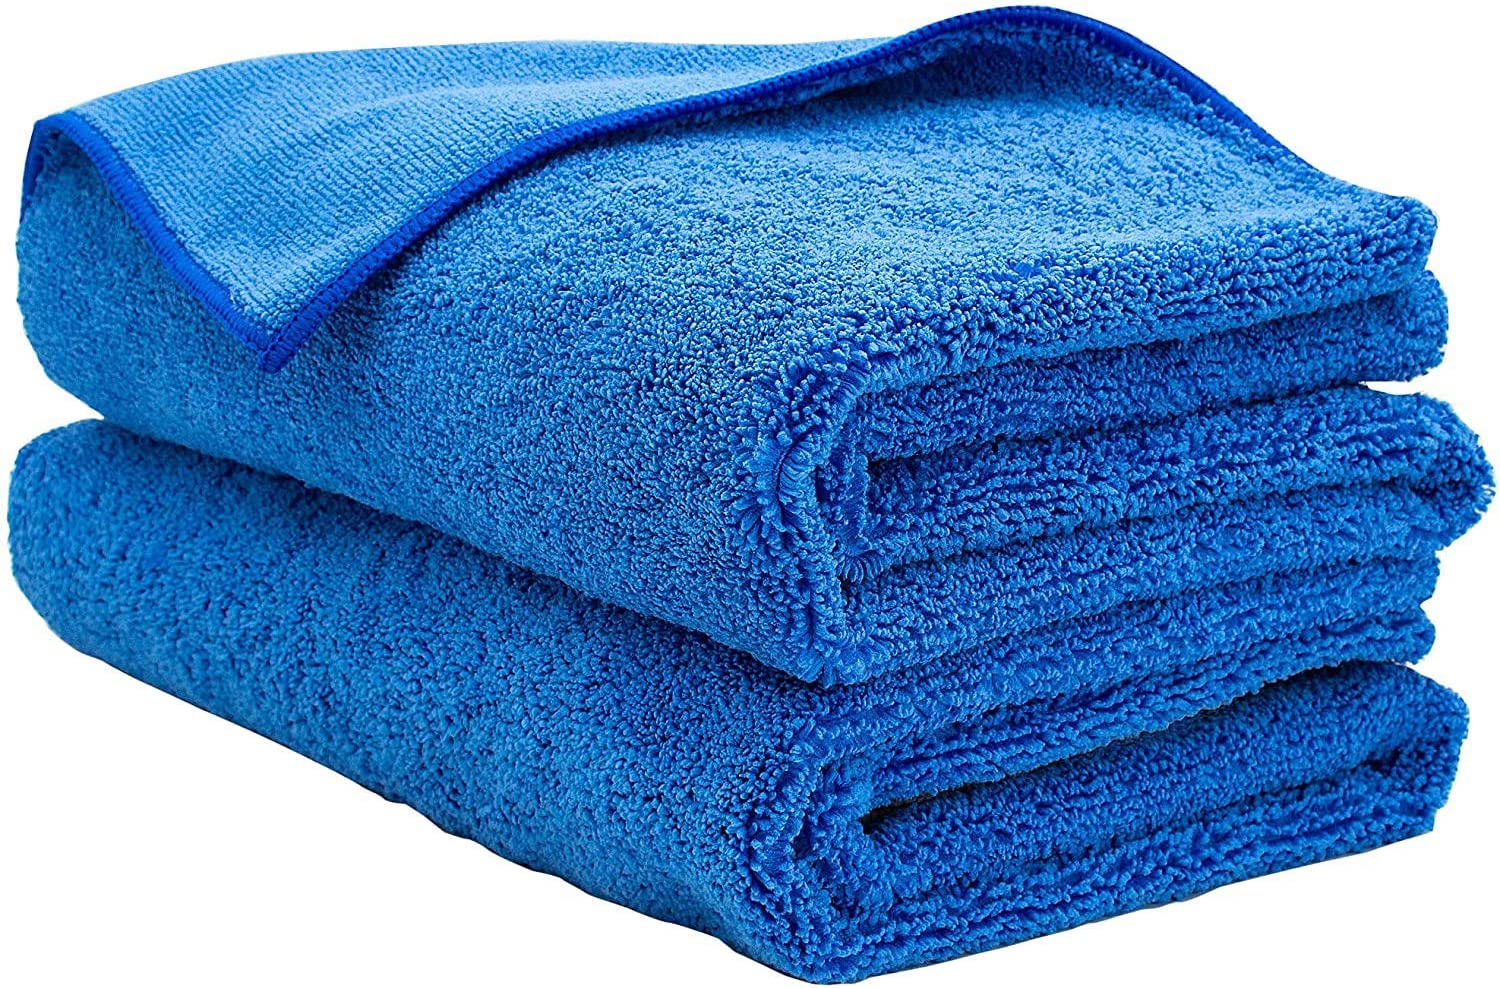  AIDEA Professional Microfiber Drying Towel-2PK, Premium Car  Drying Towel with Silk Edge, Super Absorbent & Scratch-Free, Drying Towel  for Cars, SUVs, RVs, Trucks, and Boats Gifts (30 ×22) : Automotive